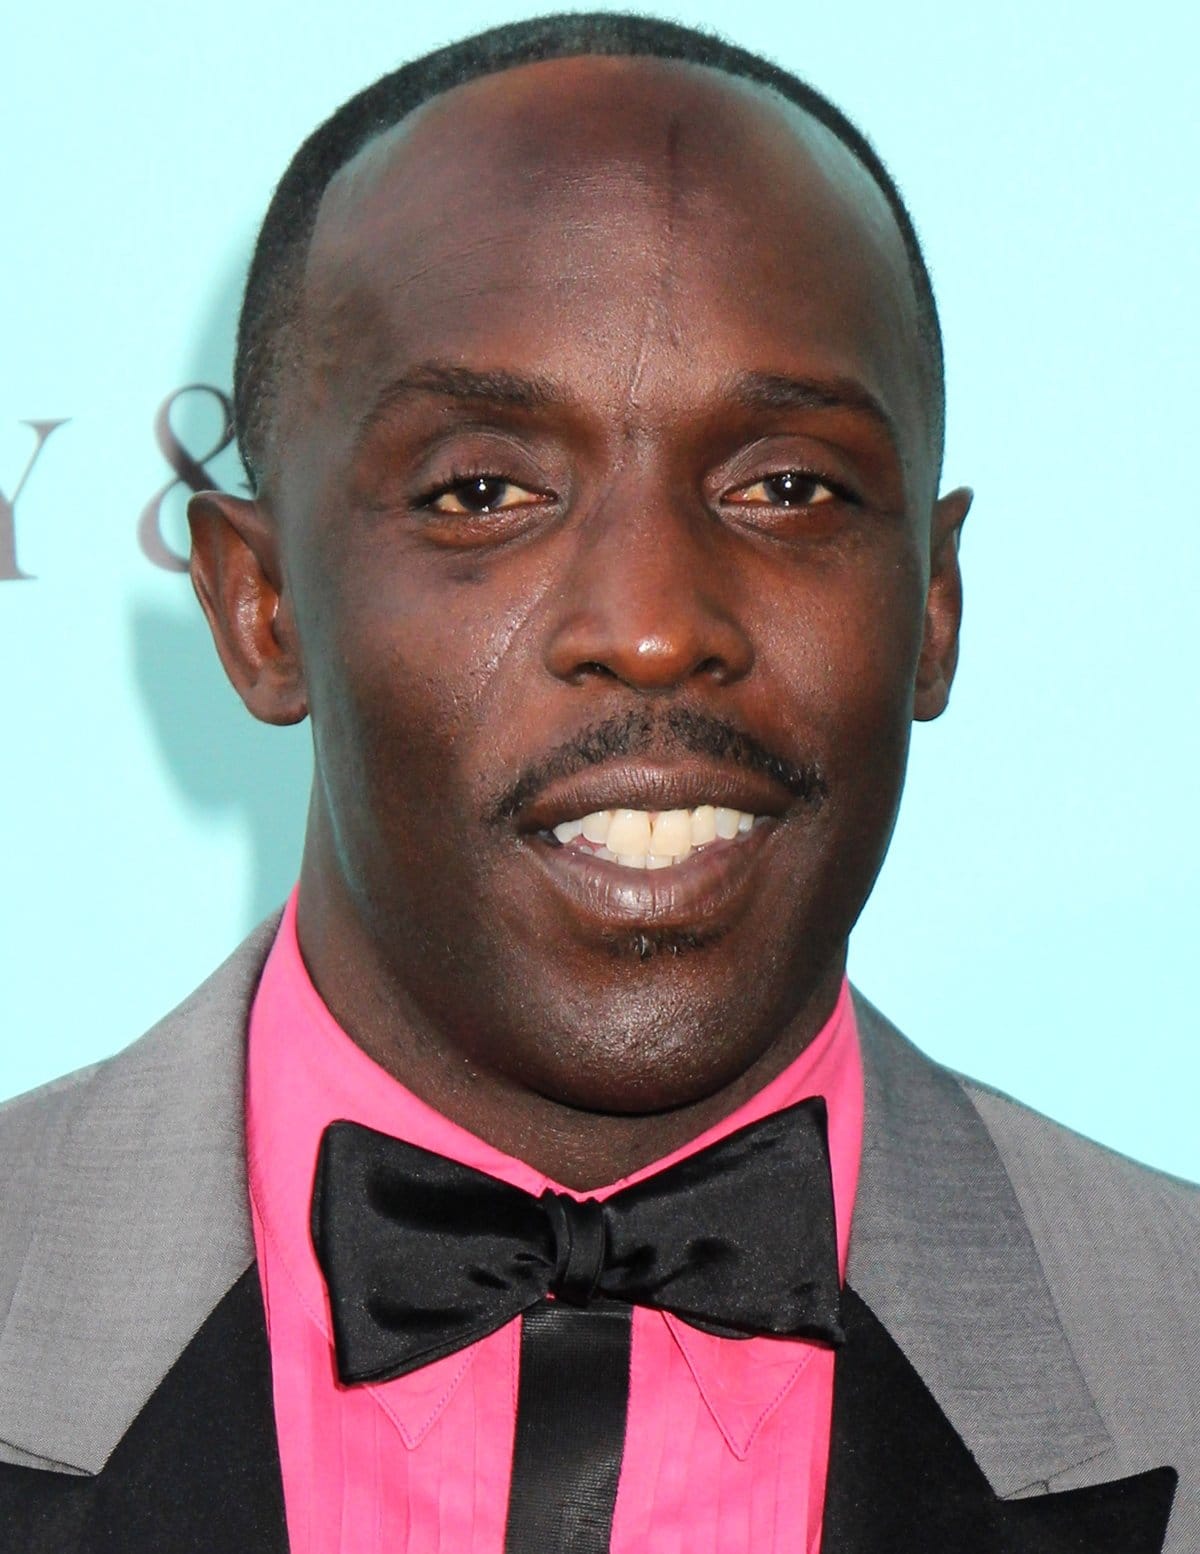 Actor Michael K. Williams, known for playing Omar Little on The Wire, had fentanyl, parafluorofentanyl, heroin, and cocaine in his system when he died